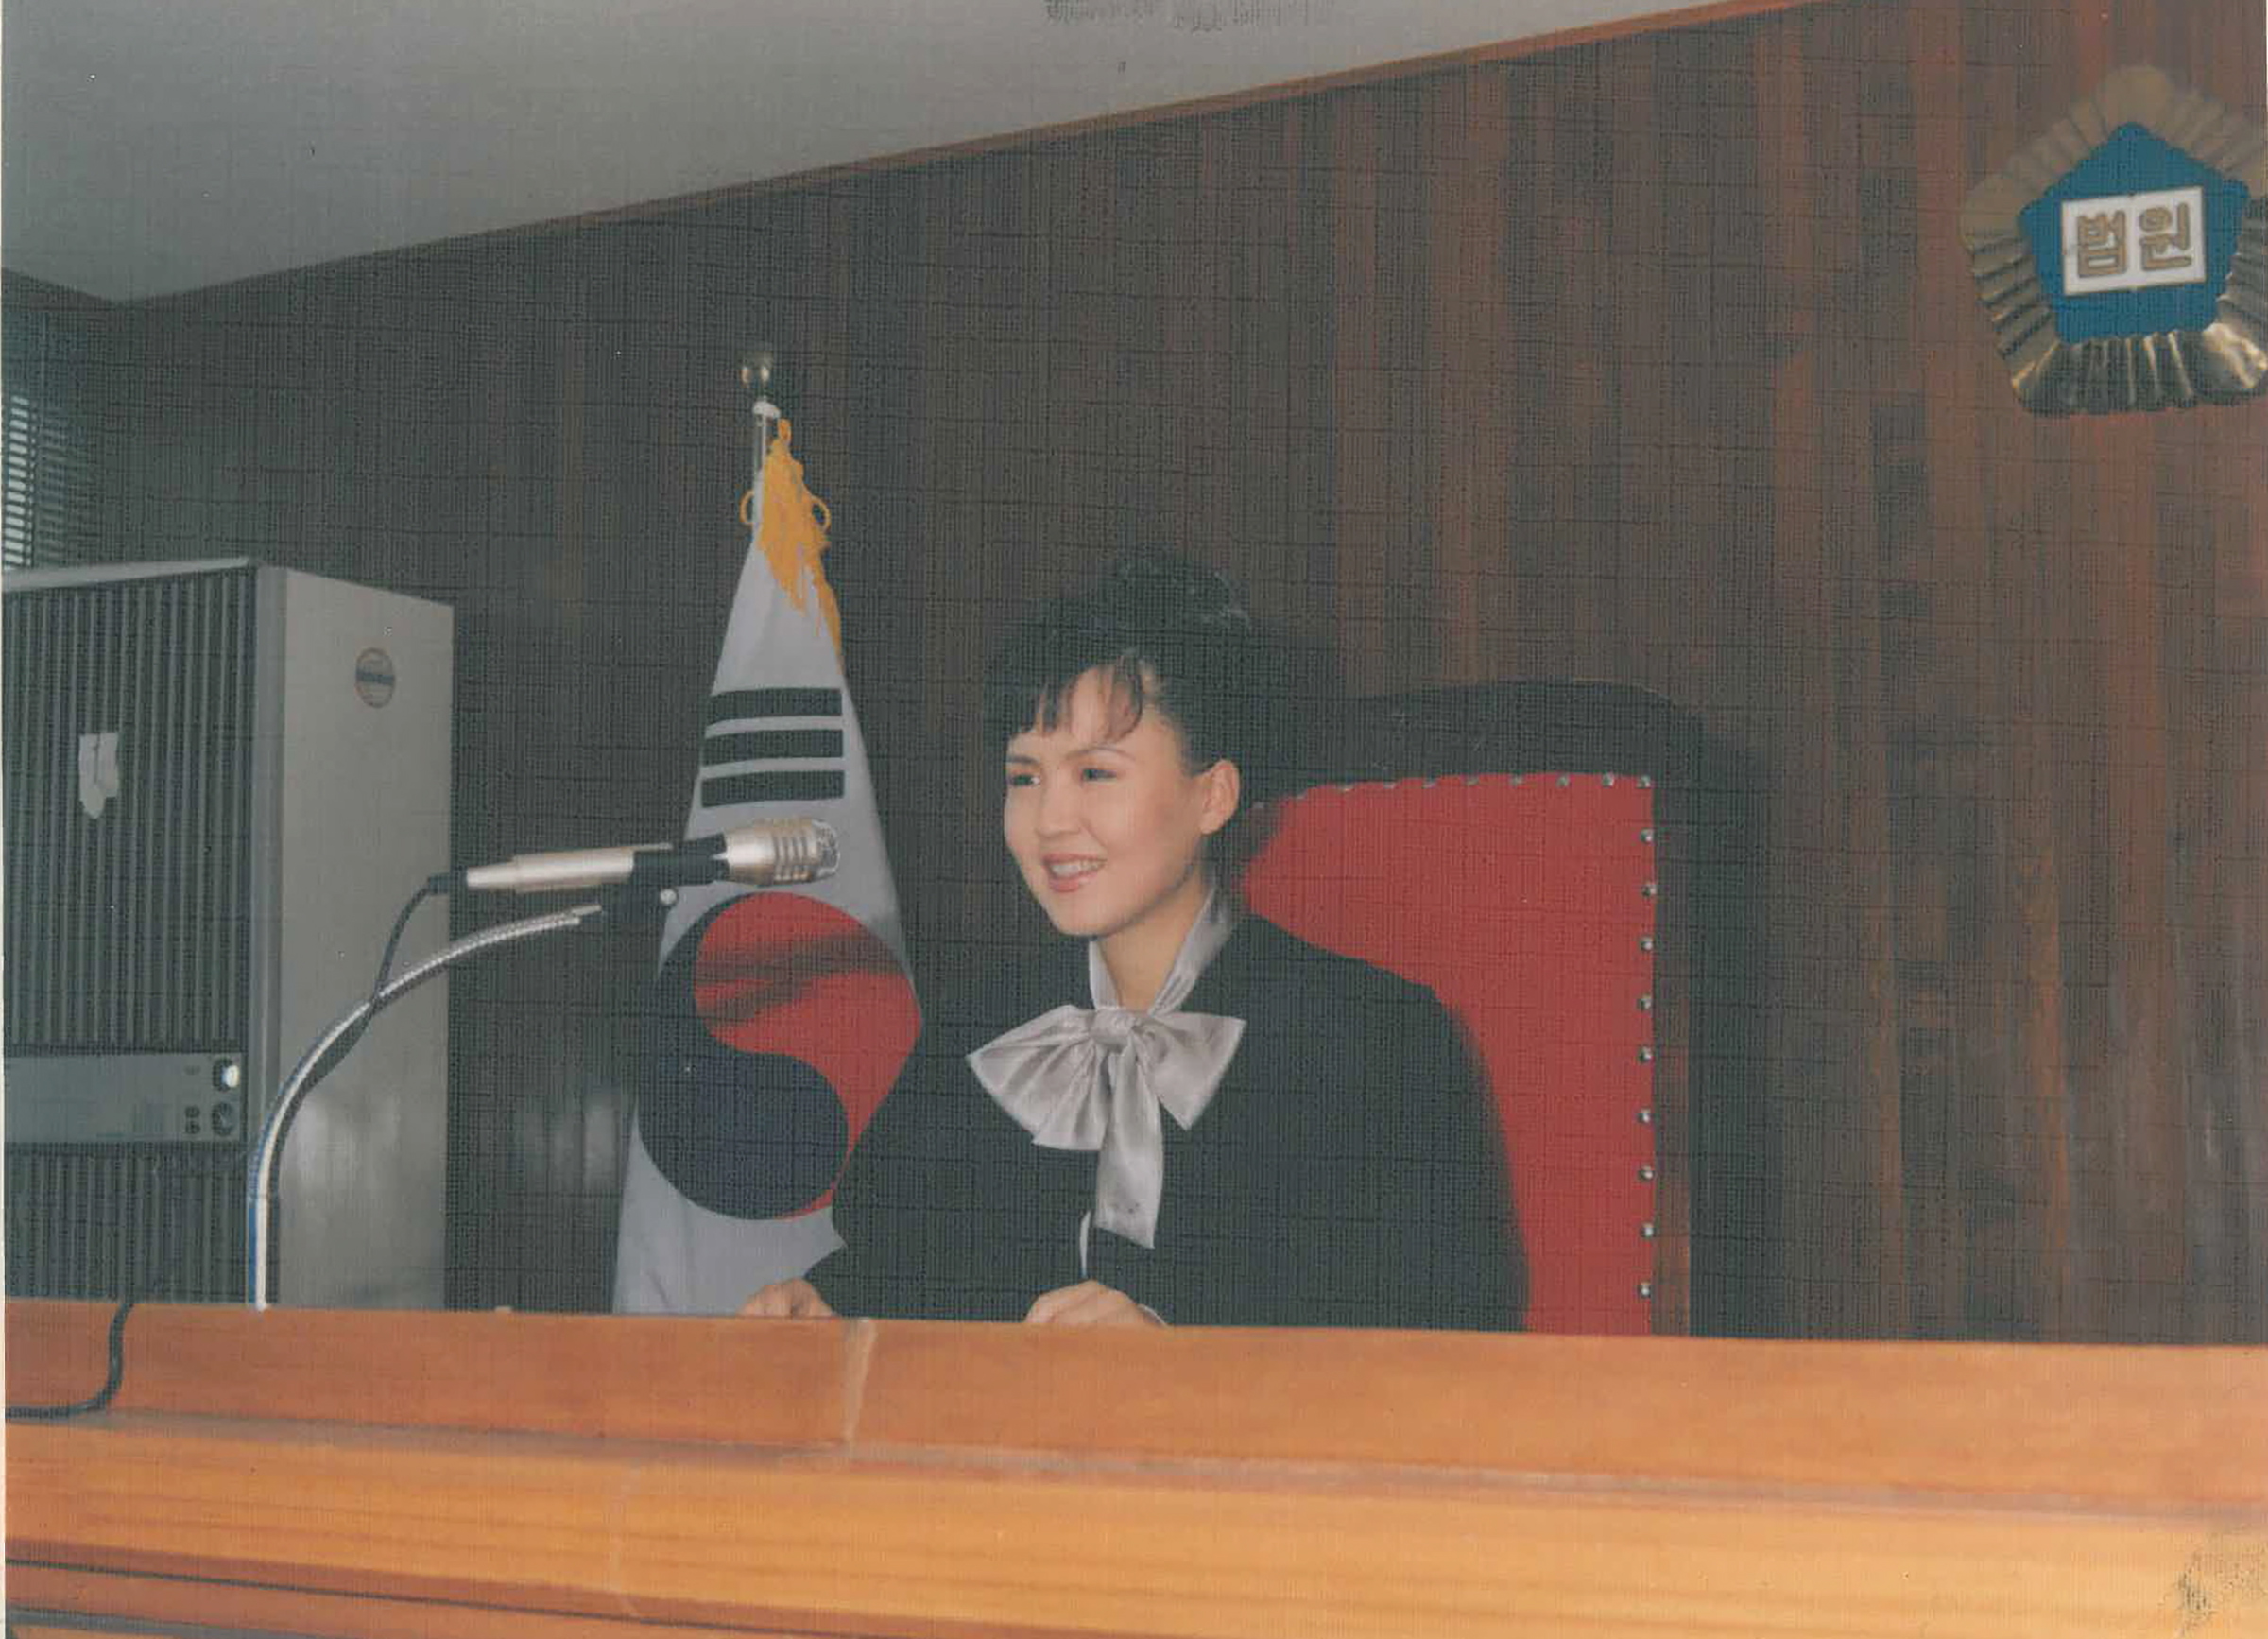 Lee working as a judge in the 90s in Seoul